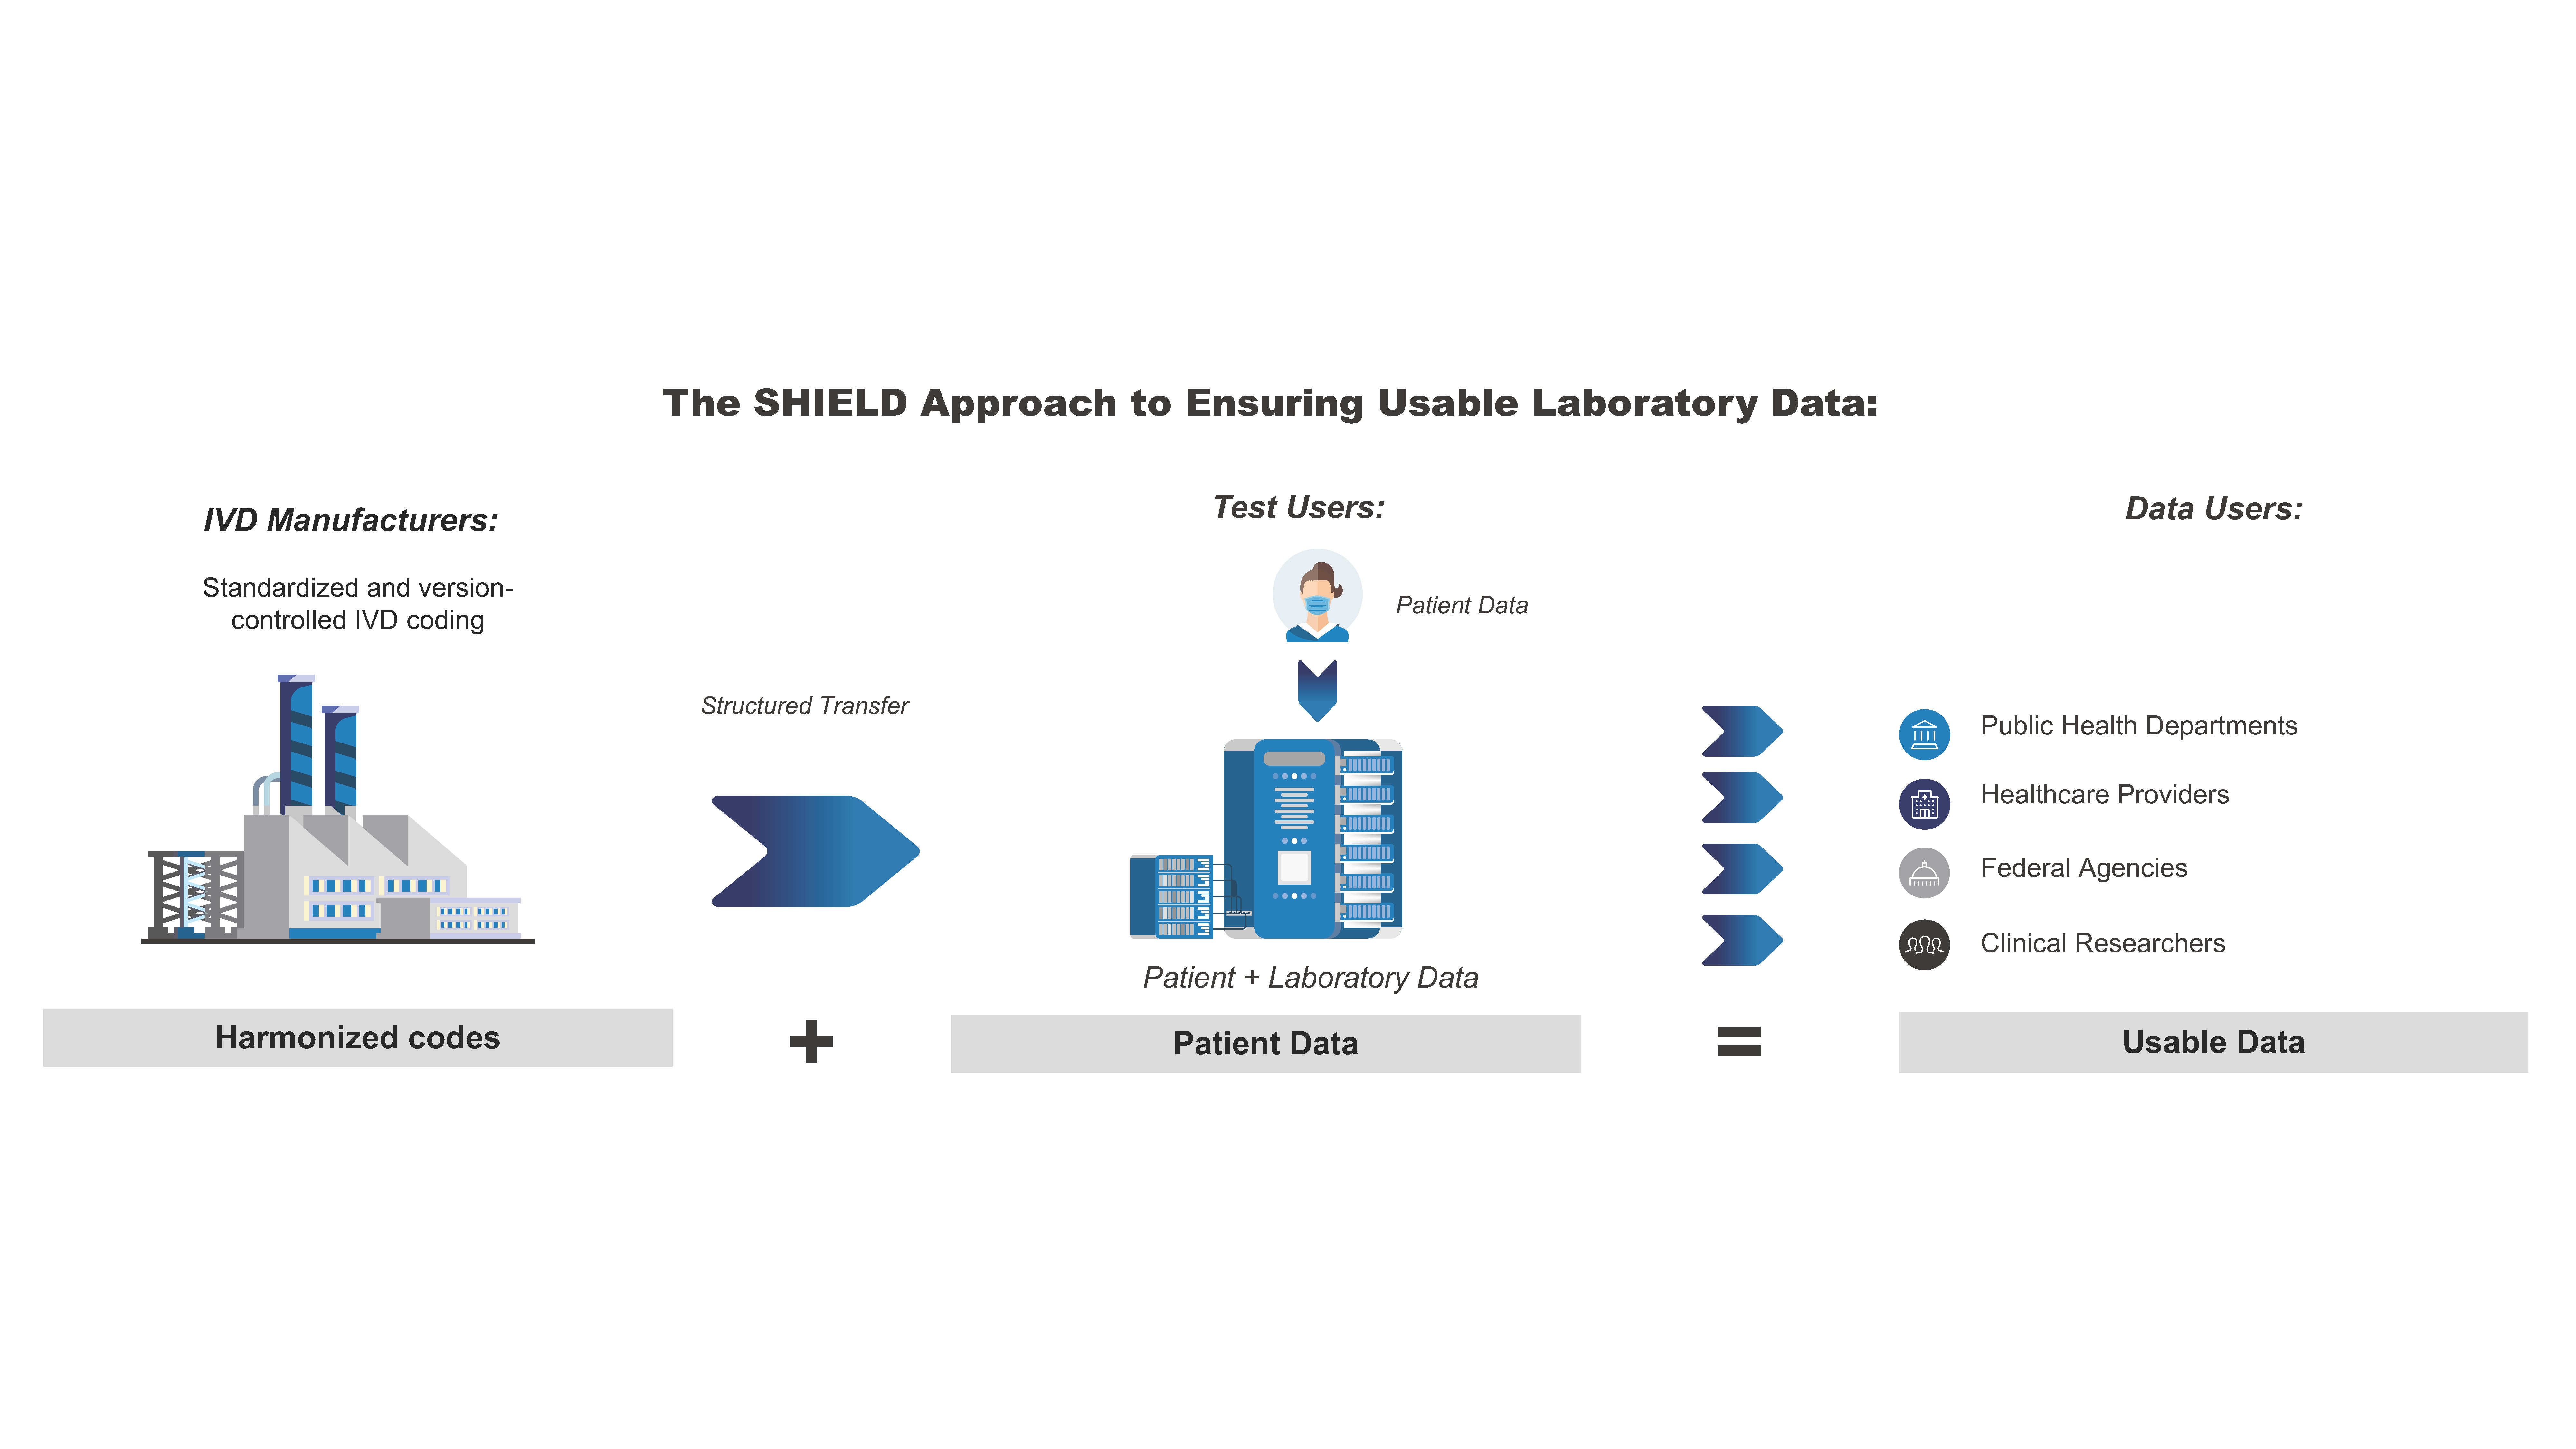 Infographic showing the SHIELD approach to ensuring usable laboratory data.